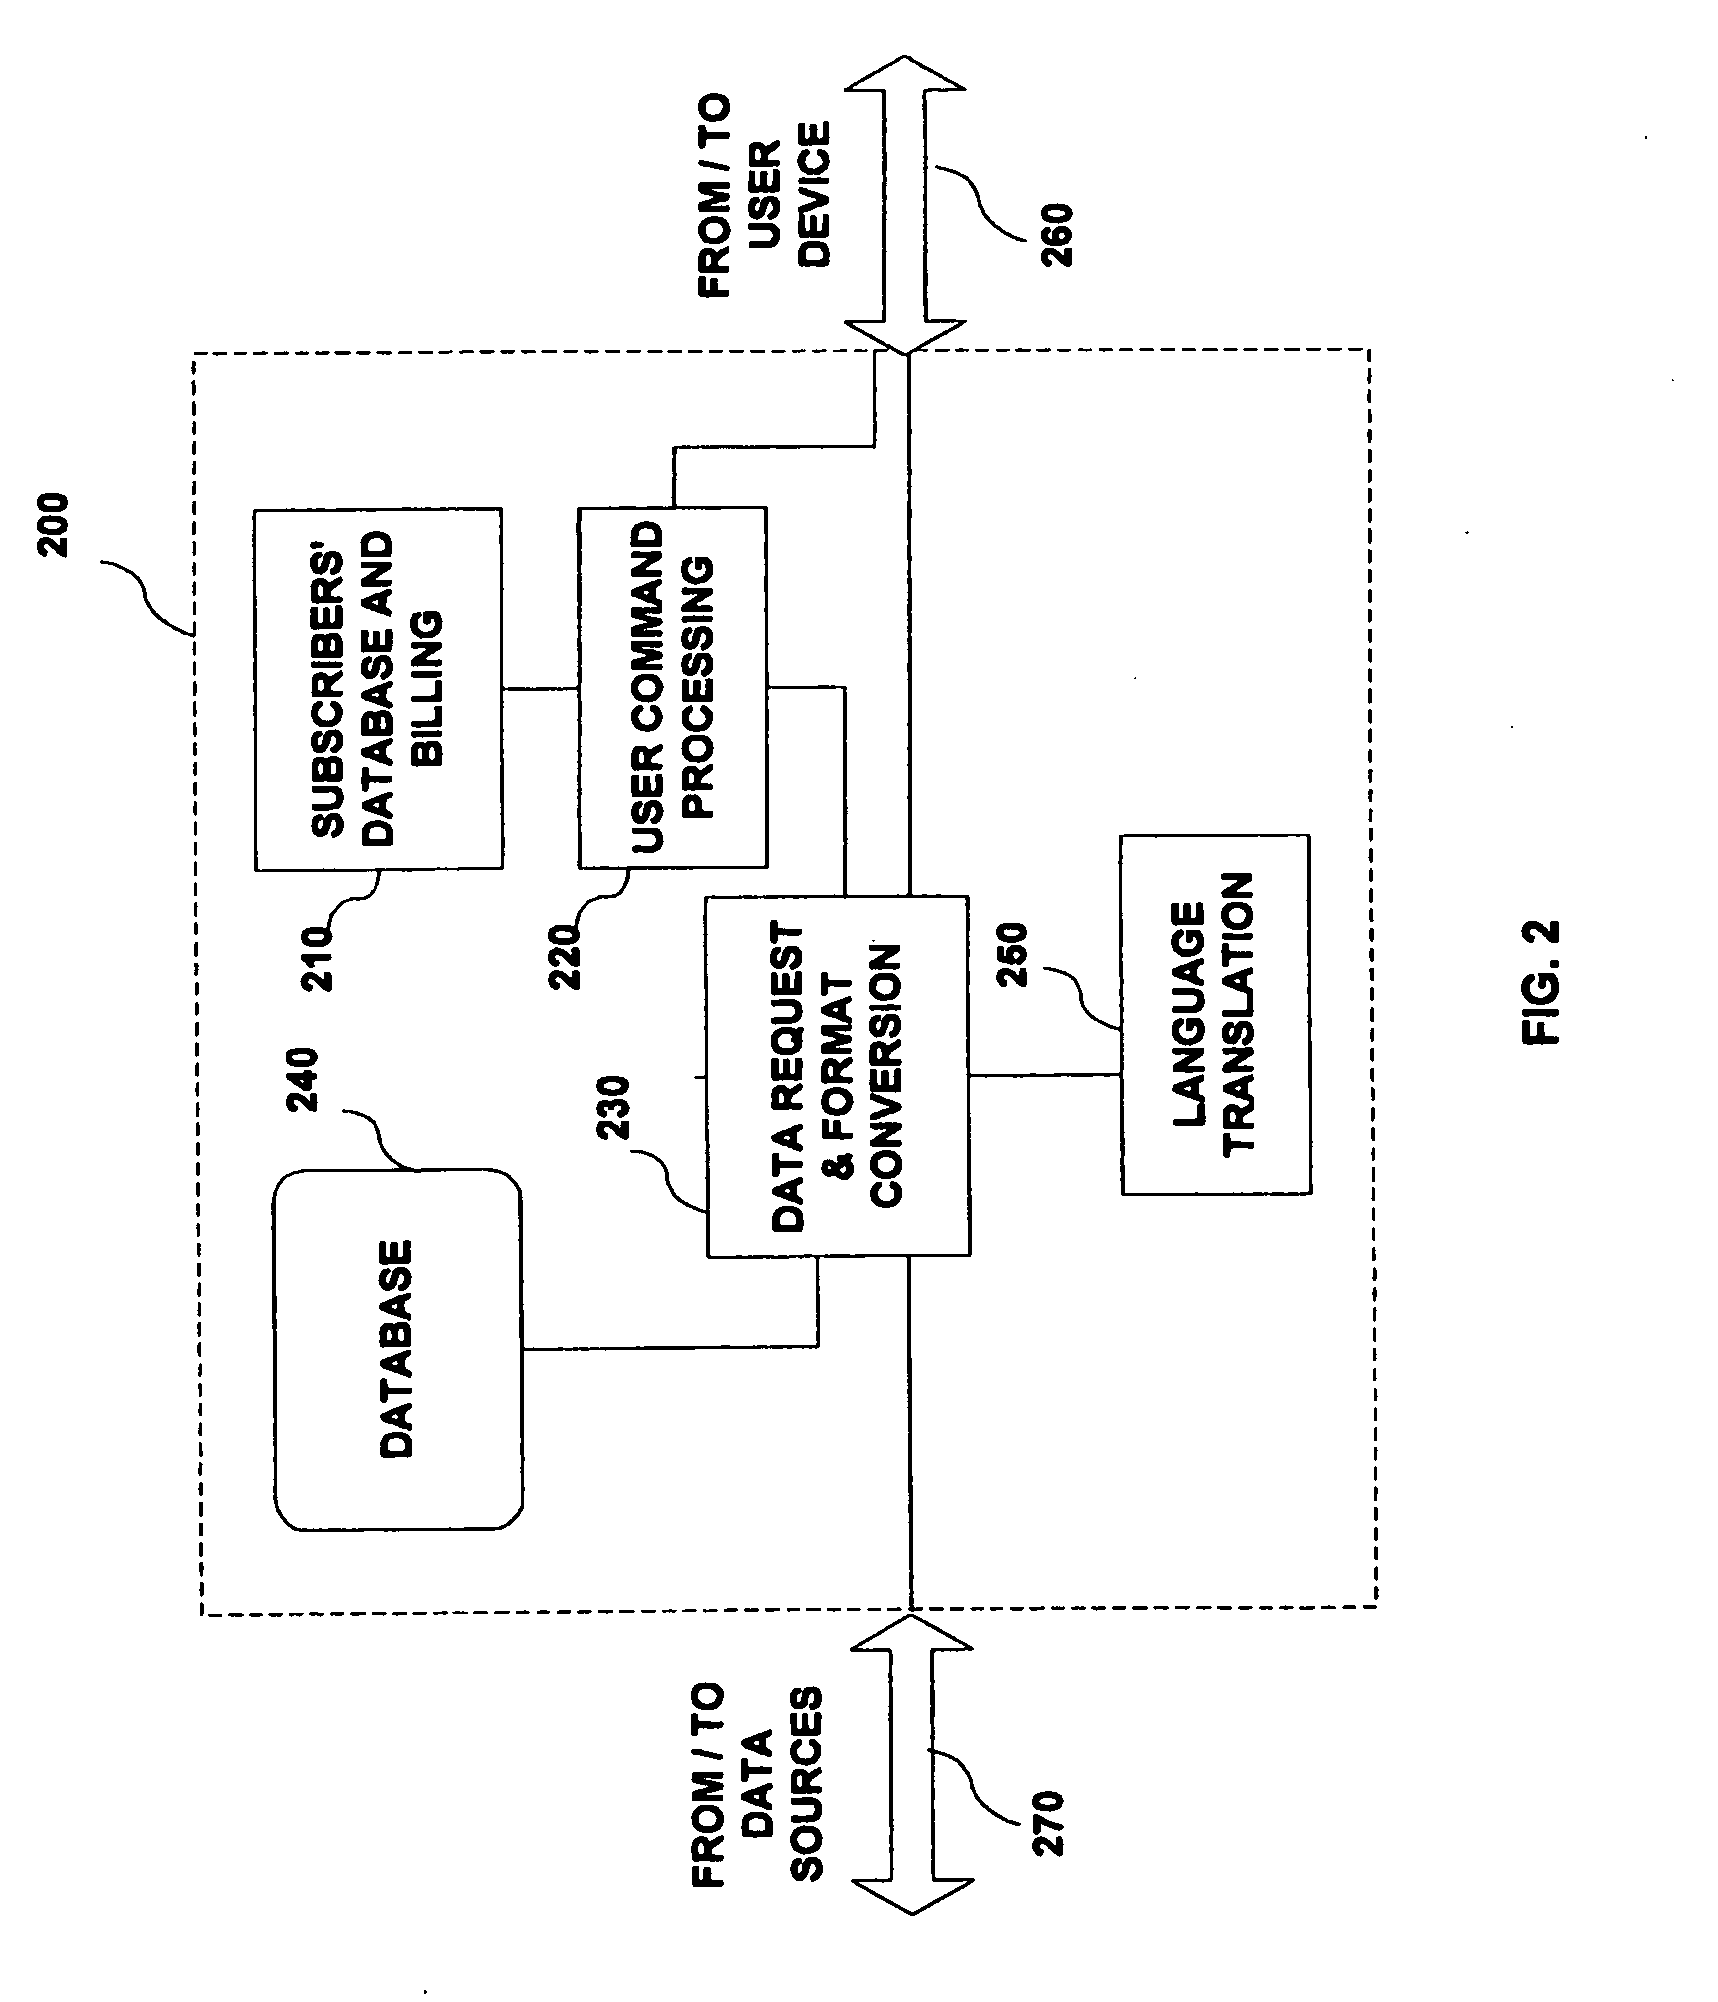 System, method and end-user device for vocal delivery of textual data